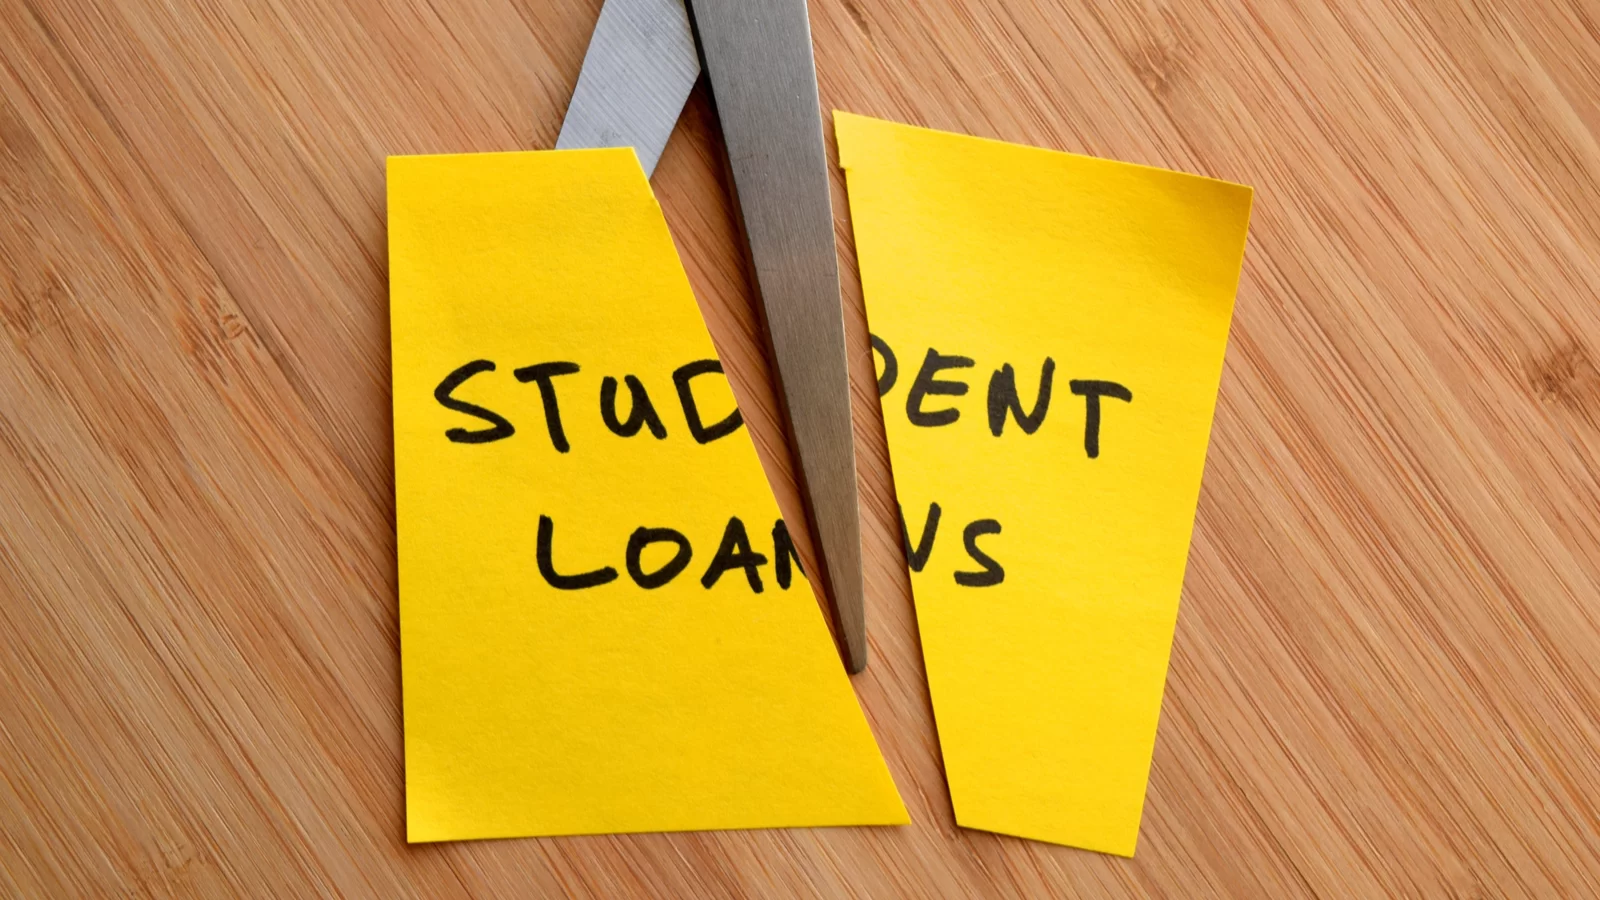 scissors-cutting-sticky-note-that-says-student-debt